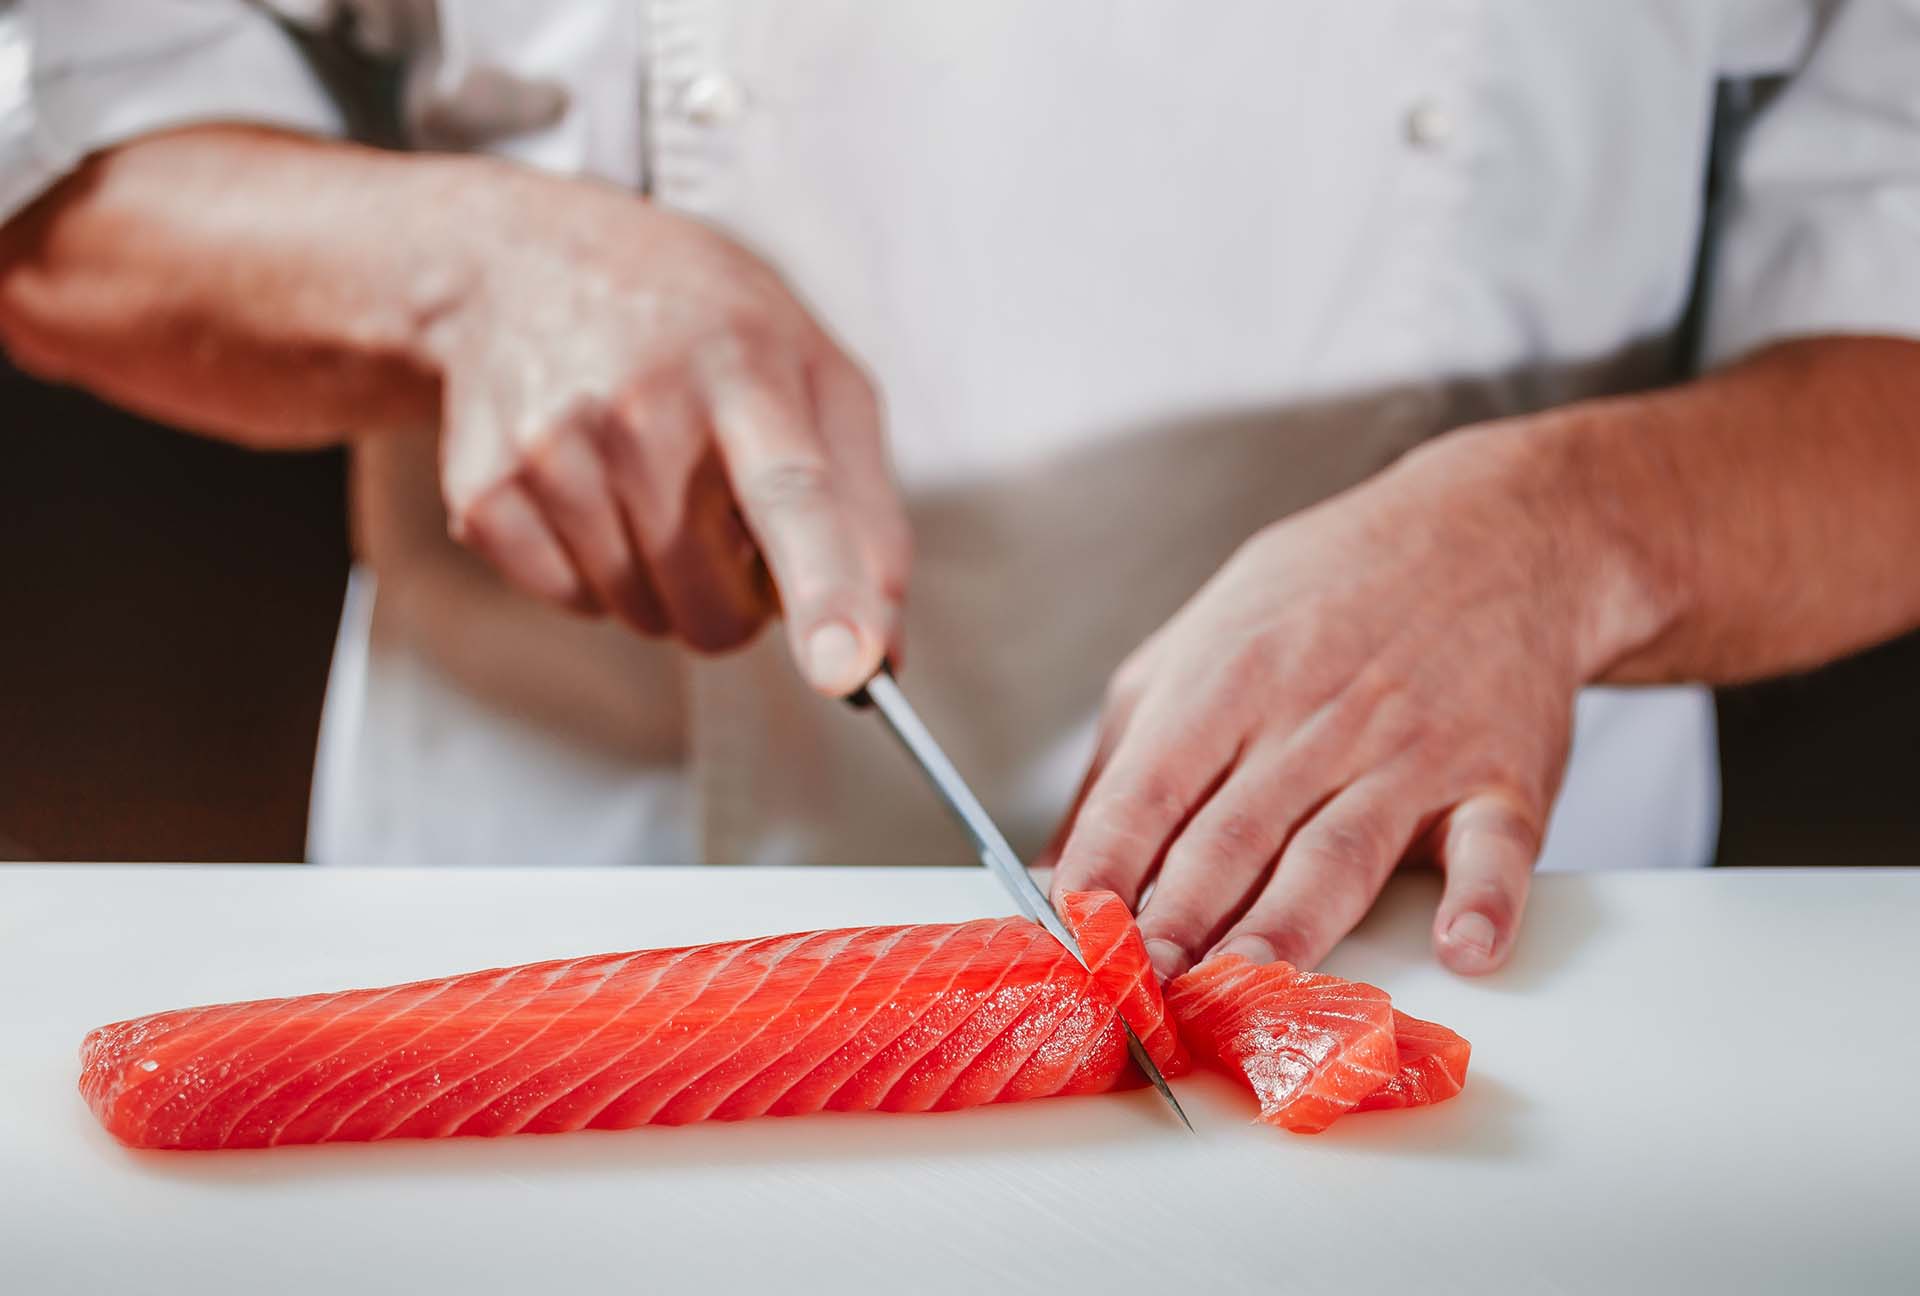 Cutting fresh red salmon fish with a sharp knife